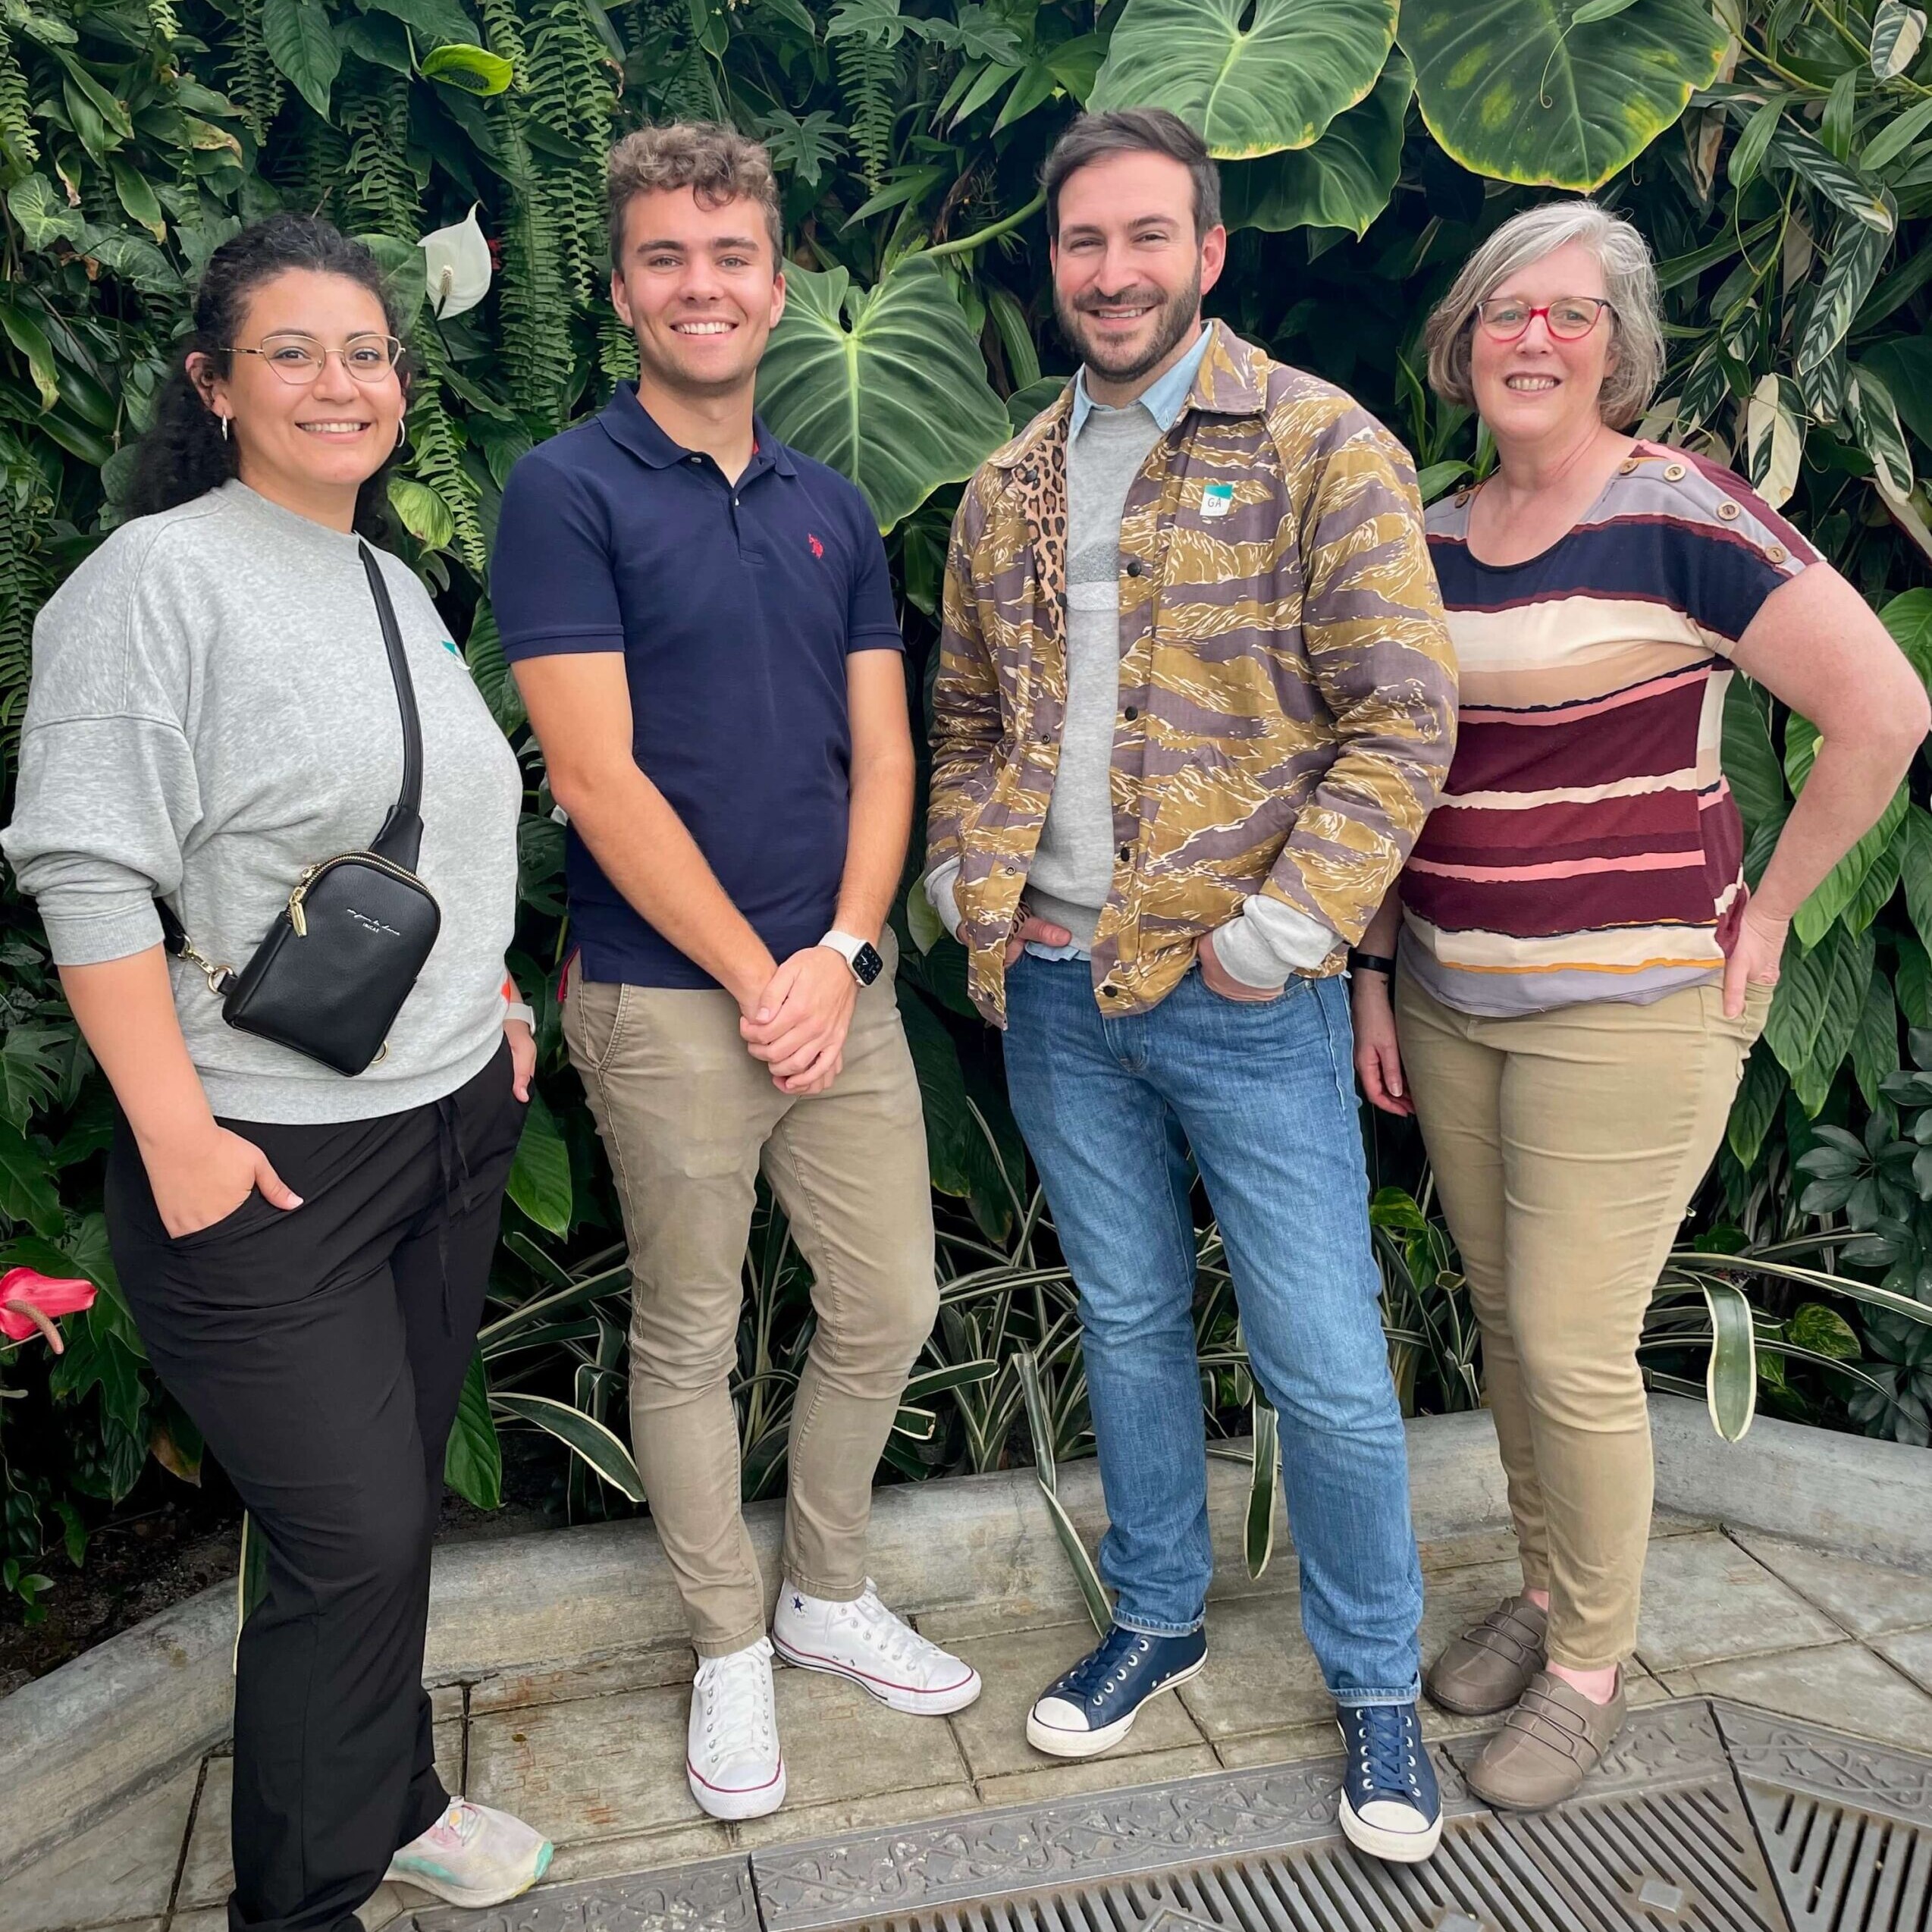 Four people stand in front of a wall of botanical greenery at the Conservatory of Flowers in San Francisco